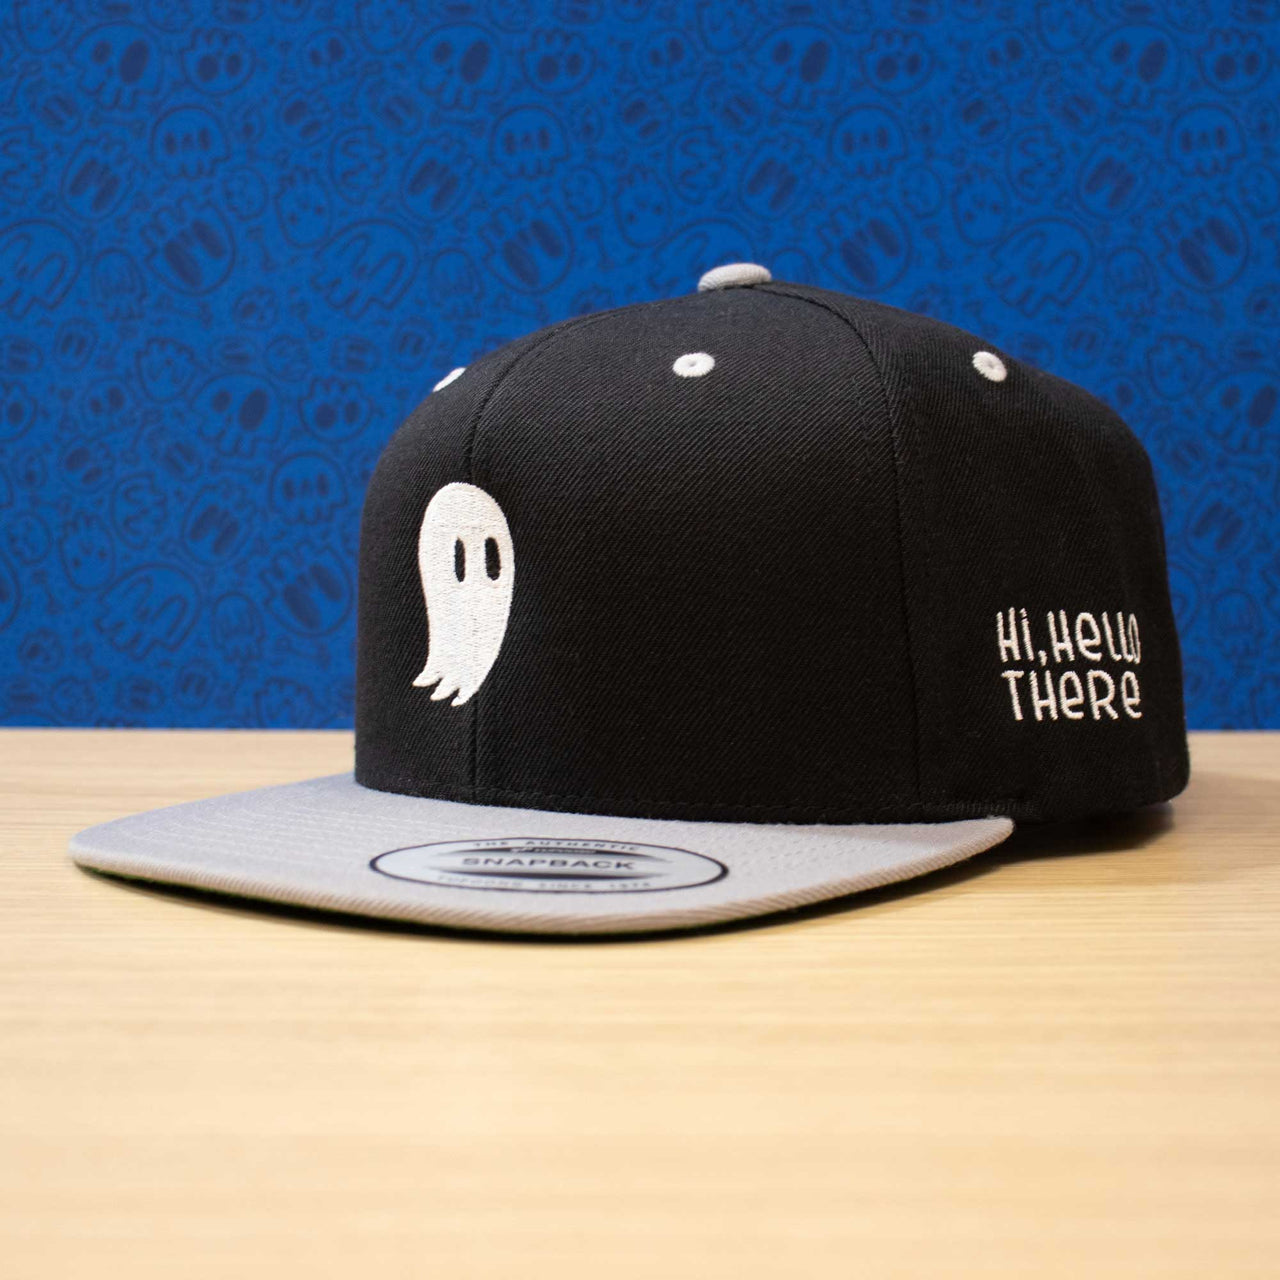 Fred the Ghost | Black and Gray Snapback Hat